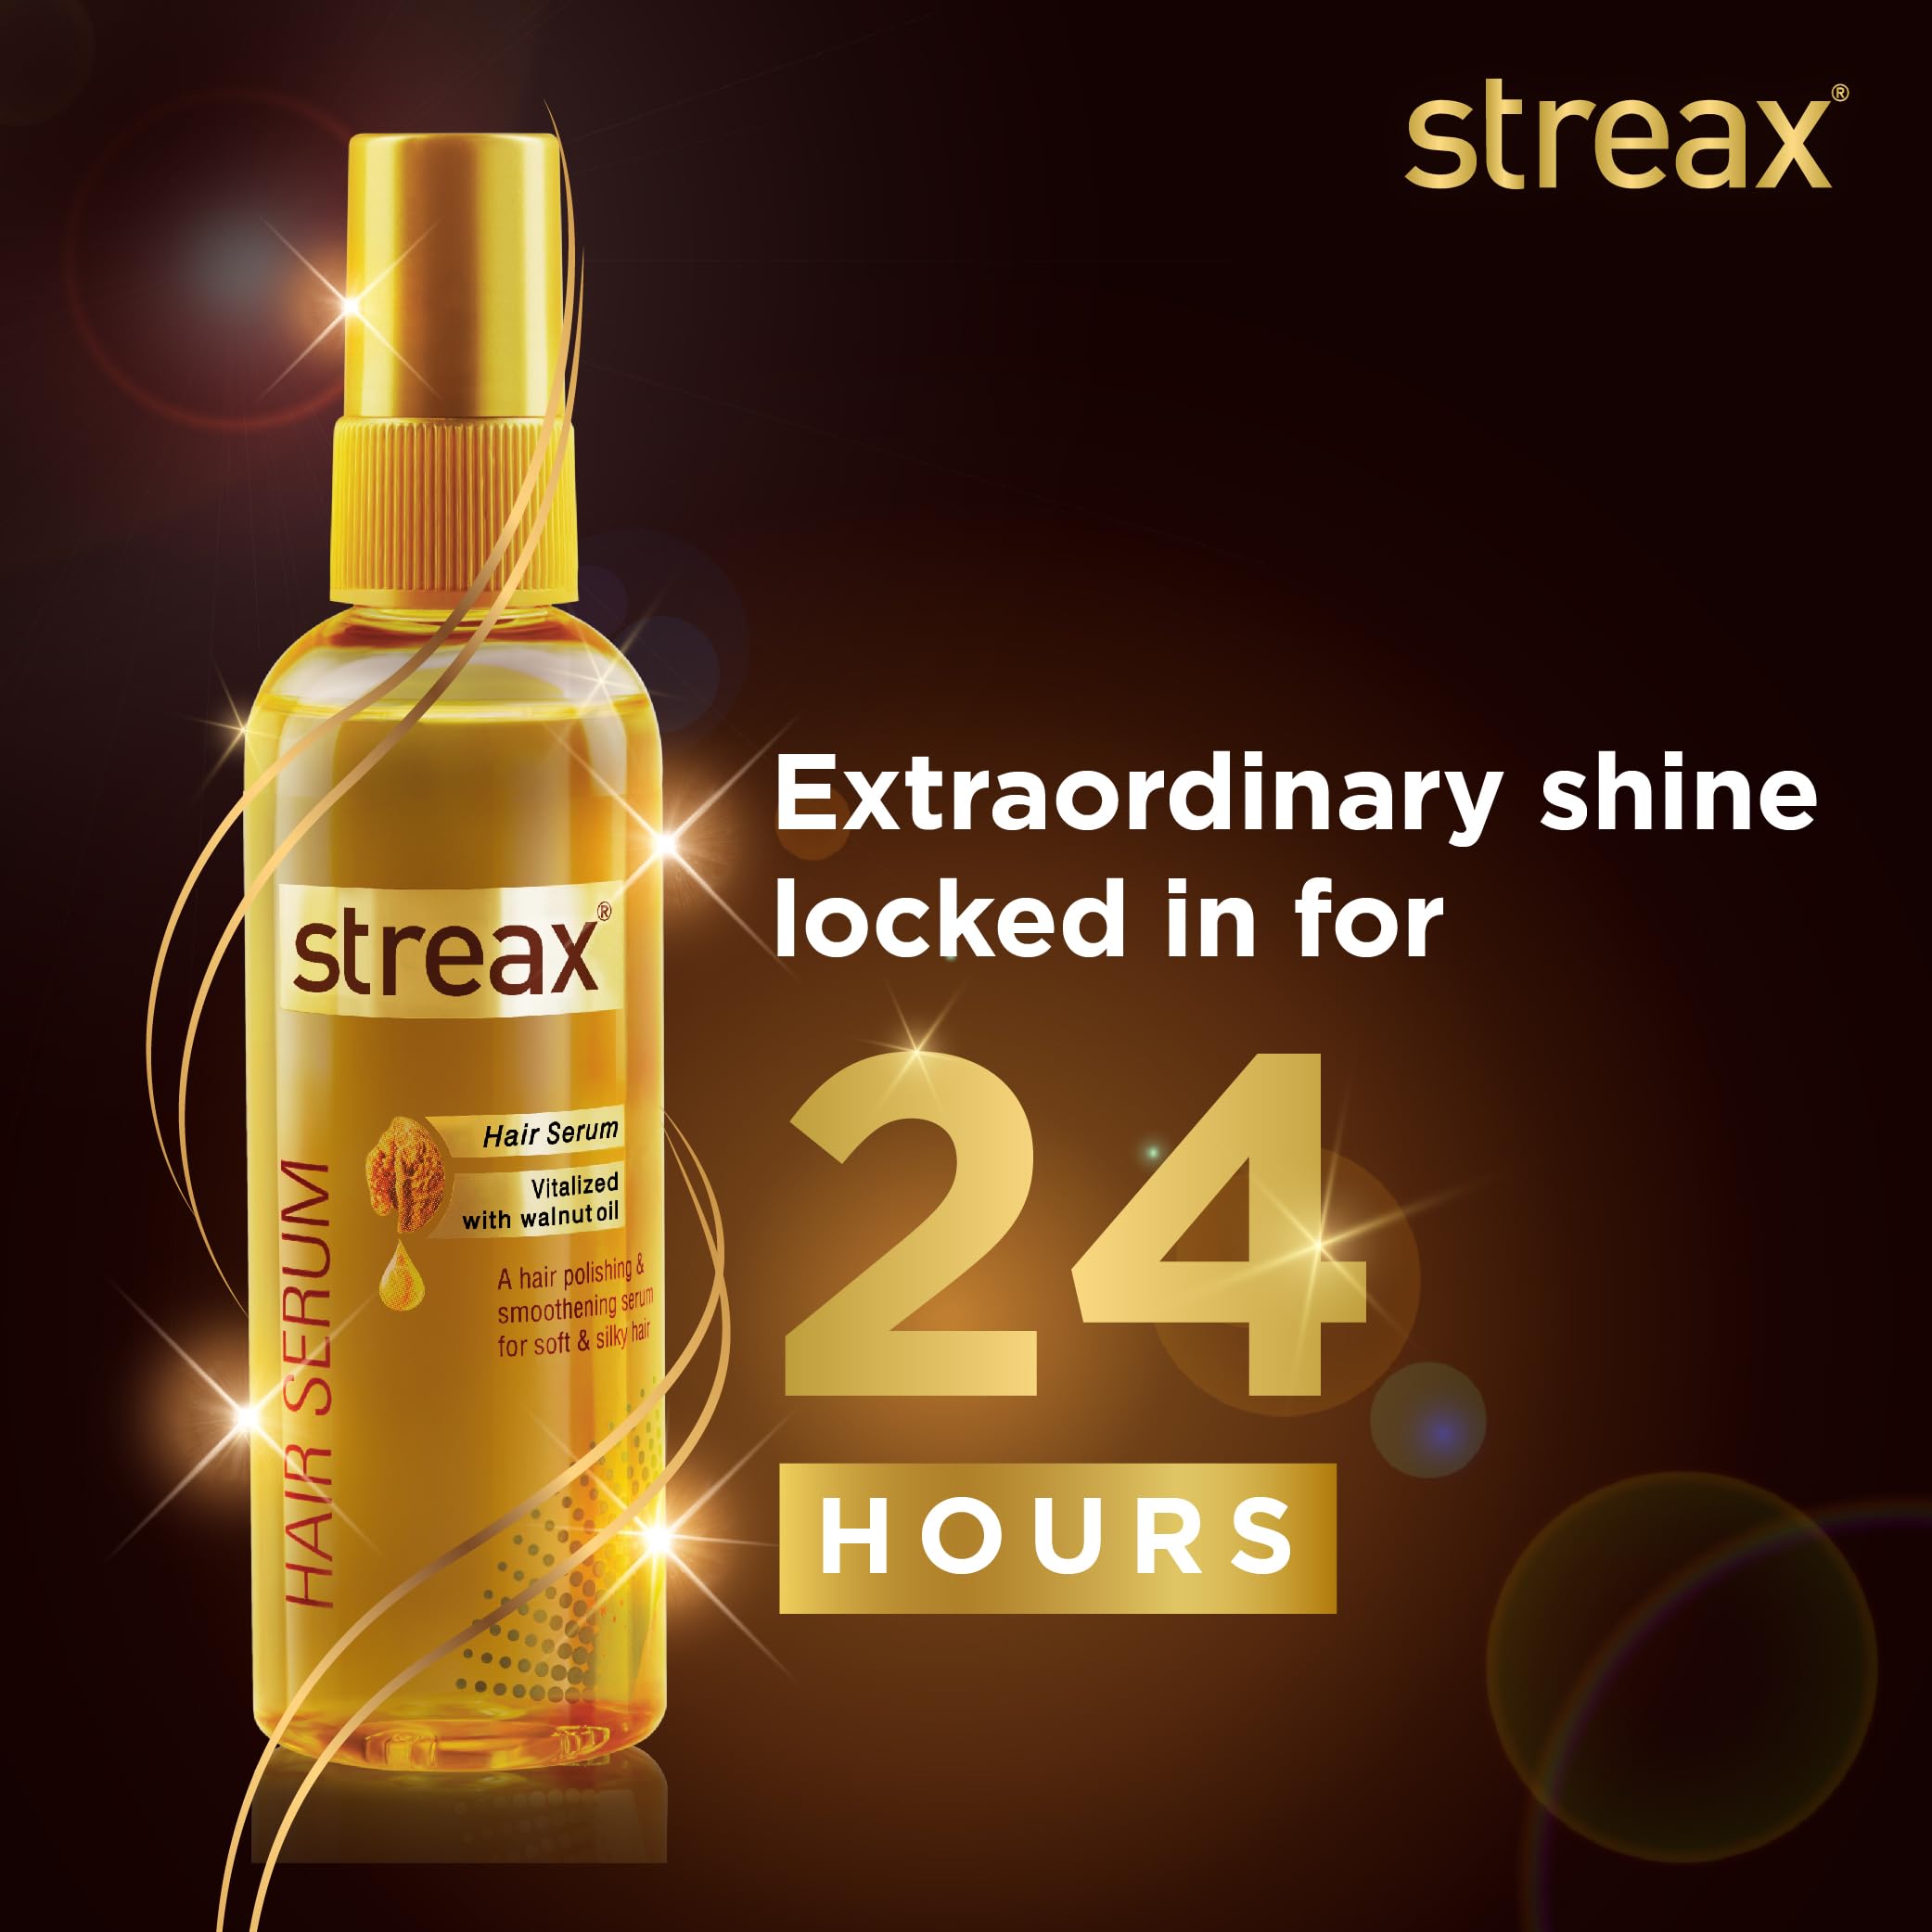 Streax Hair Serum 125ml, Vitalized with Walnut Oil, For Hair Smoothening & Shine, For Dry & Frizzy Hair